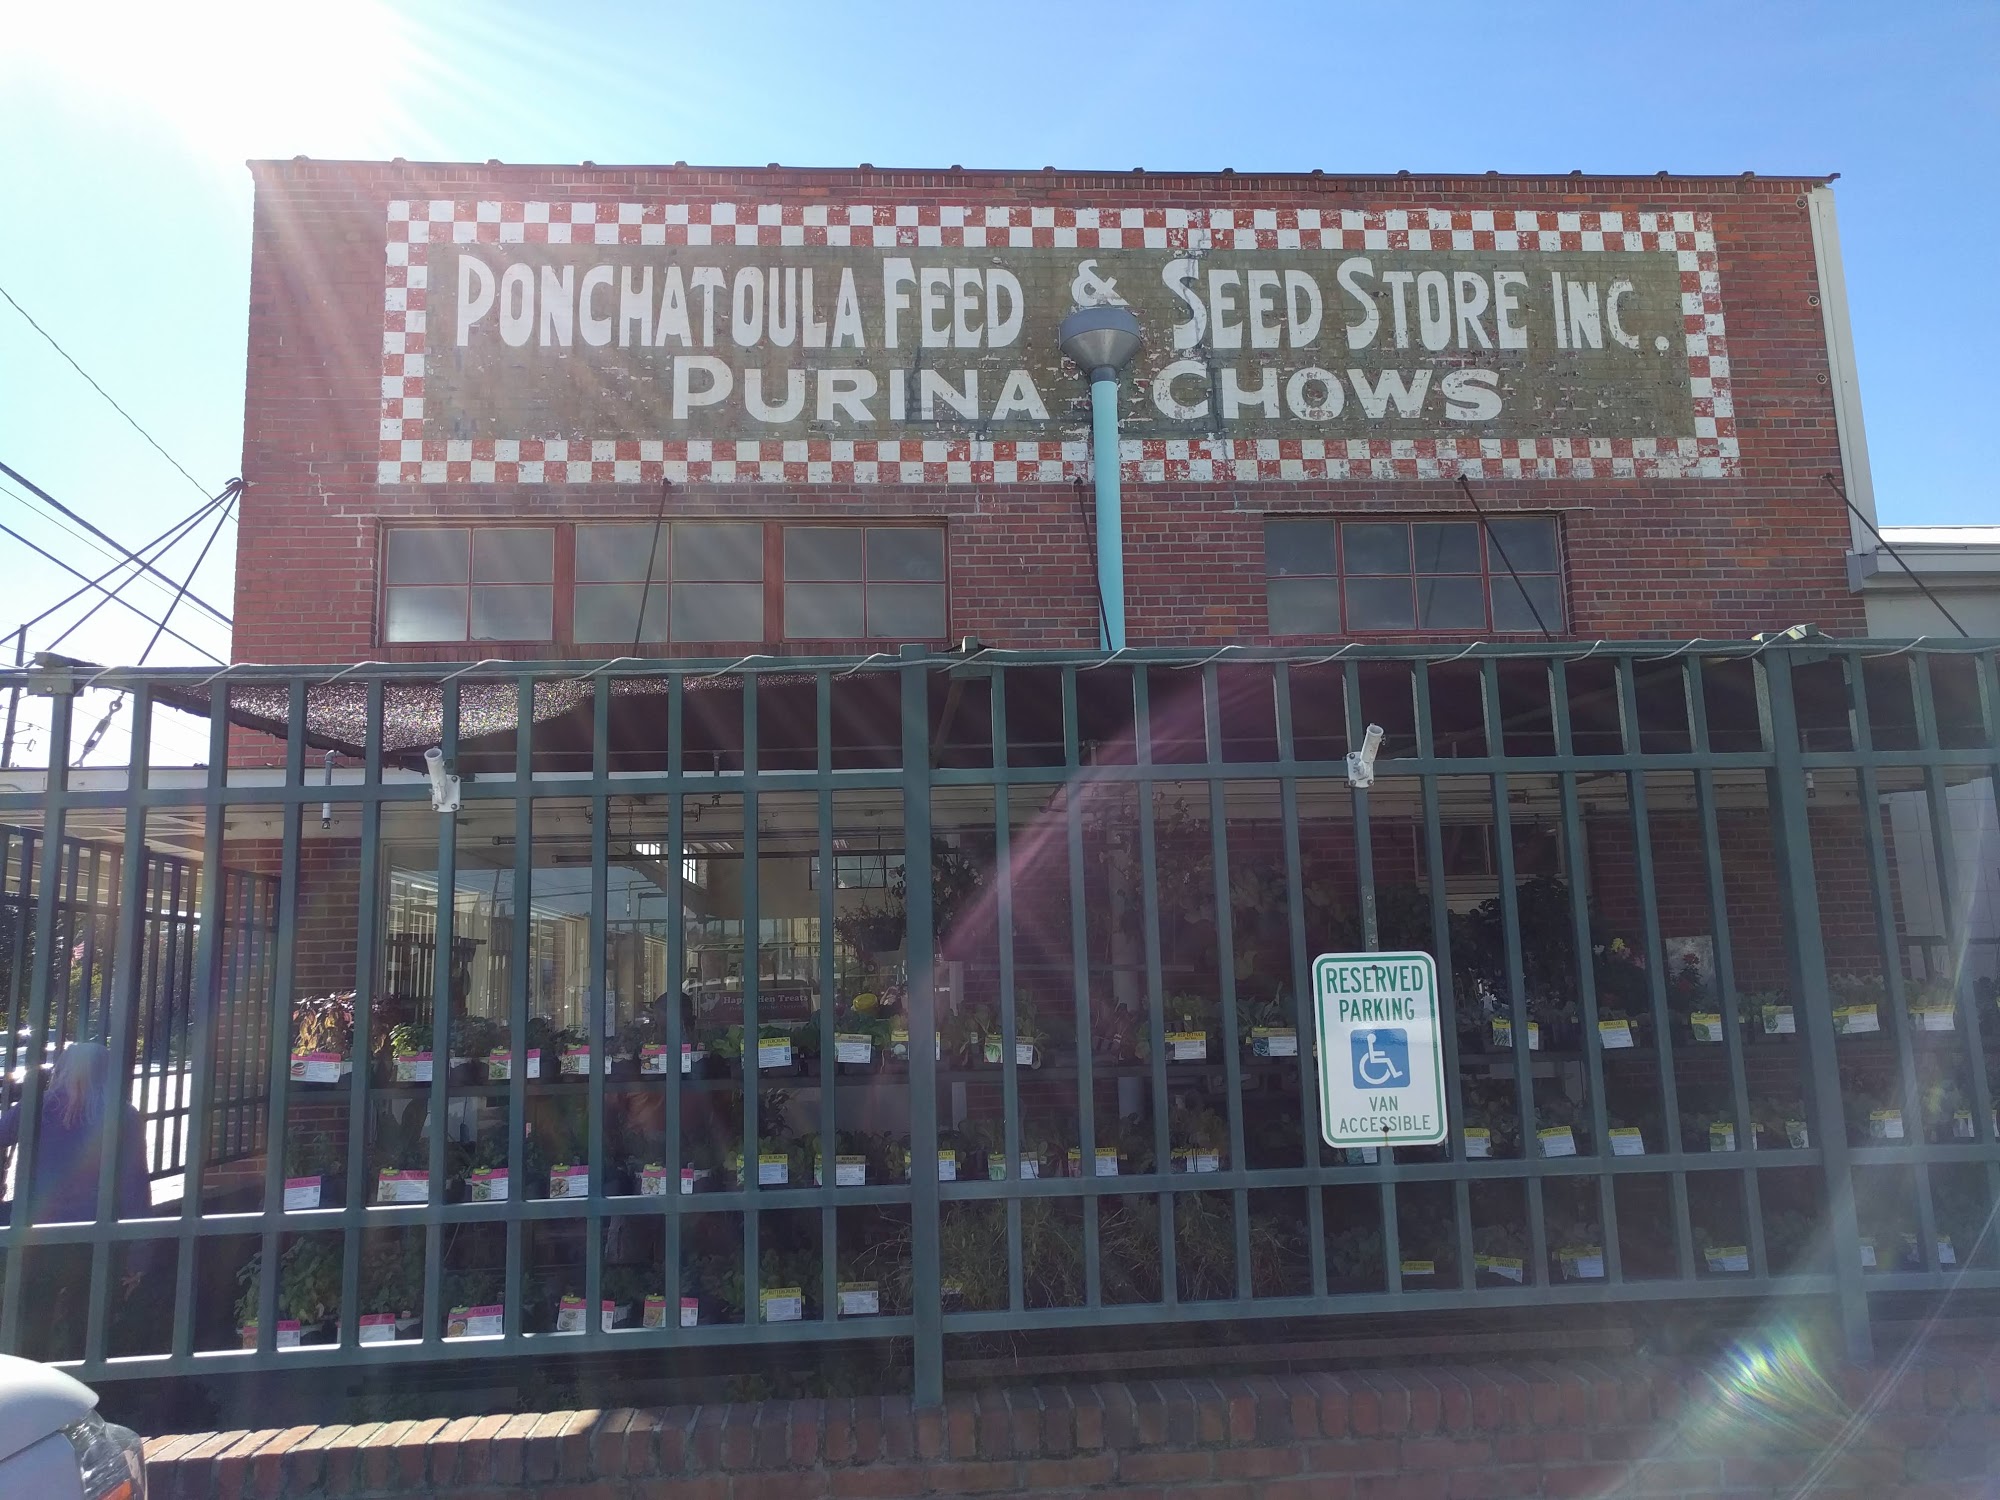 Ponchatoula Feed & Seed Store